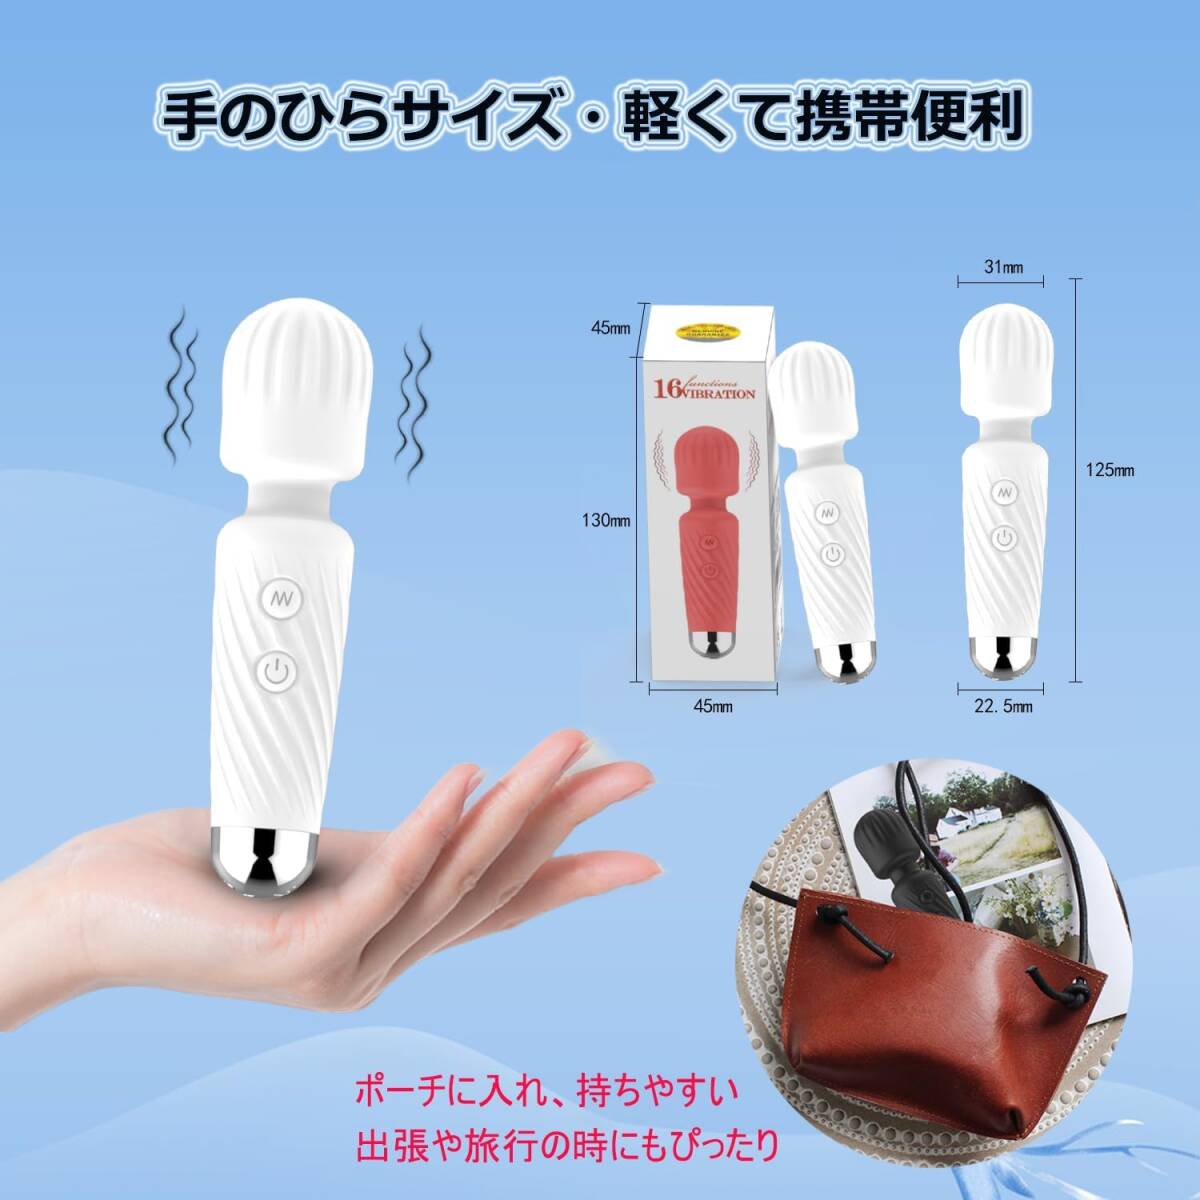 Fusiki[ popular Mini type ] Mini electro- ma16 kind oscillation powerful cordless life waterproof quiet sound design electric handle te compact USB rechargeable silicon made ( white )